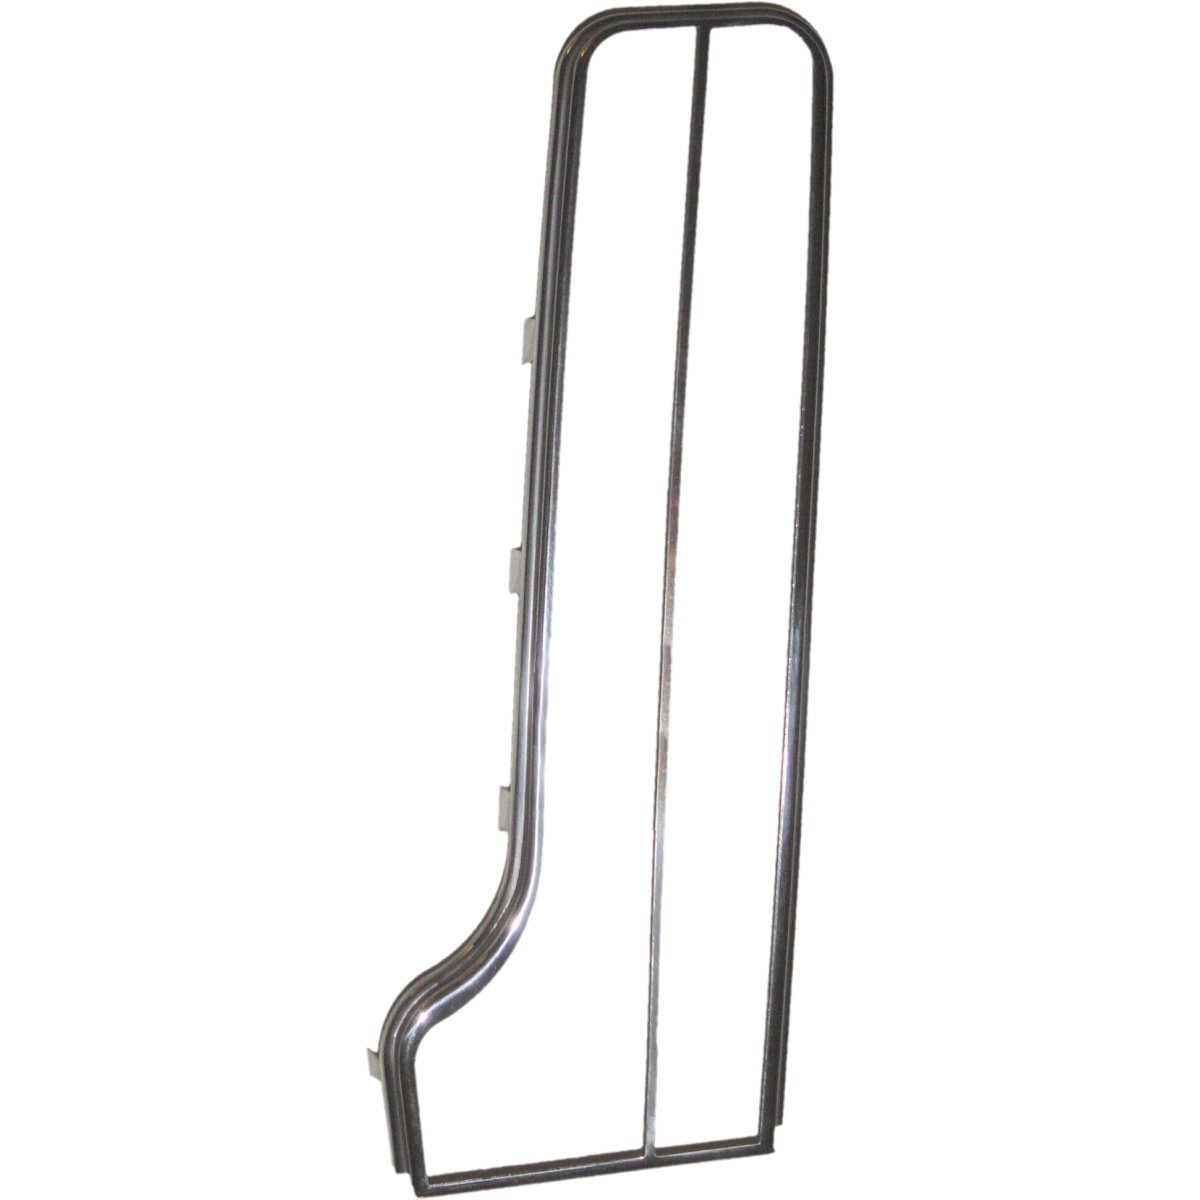 BROTHERS Accelerator Pedal C4041-67